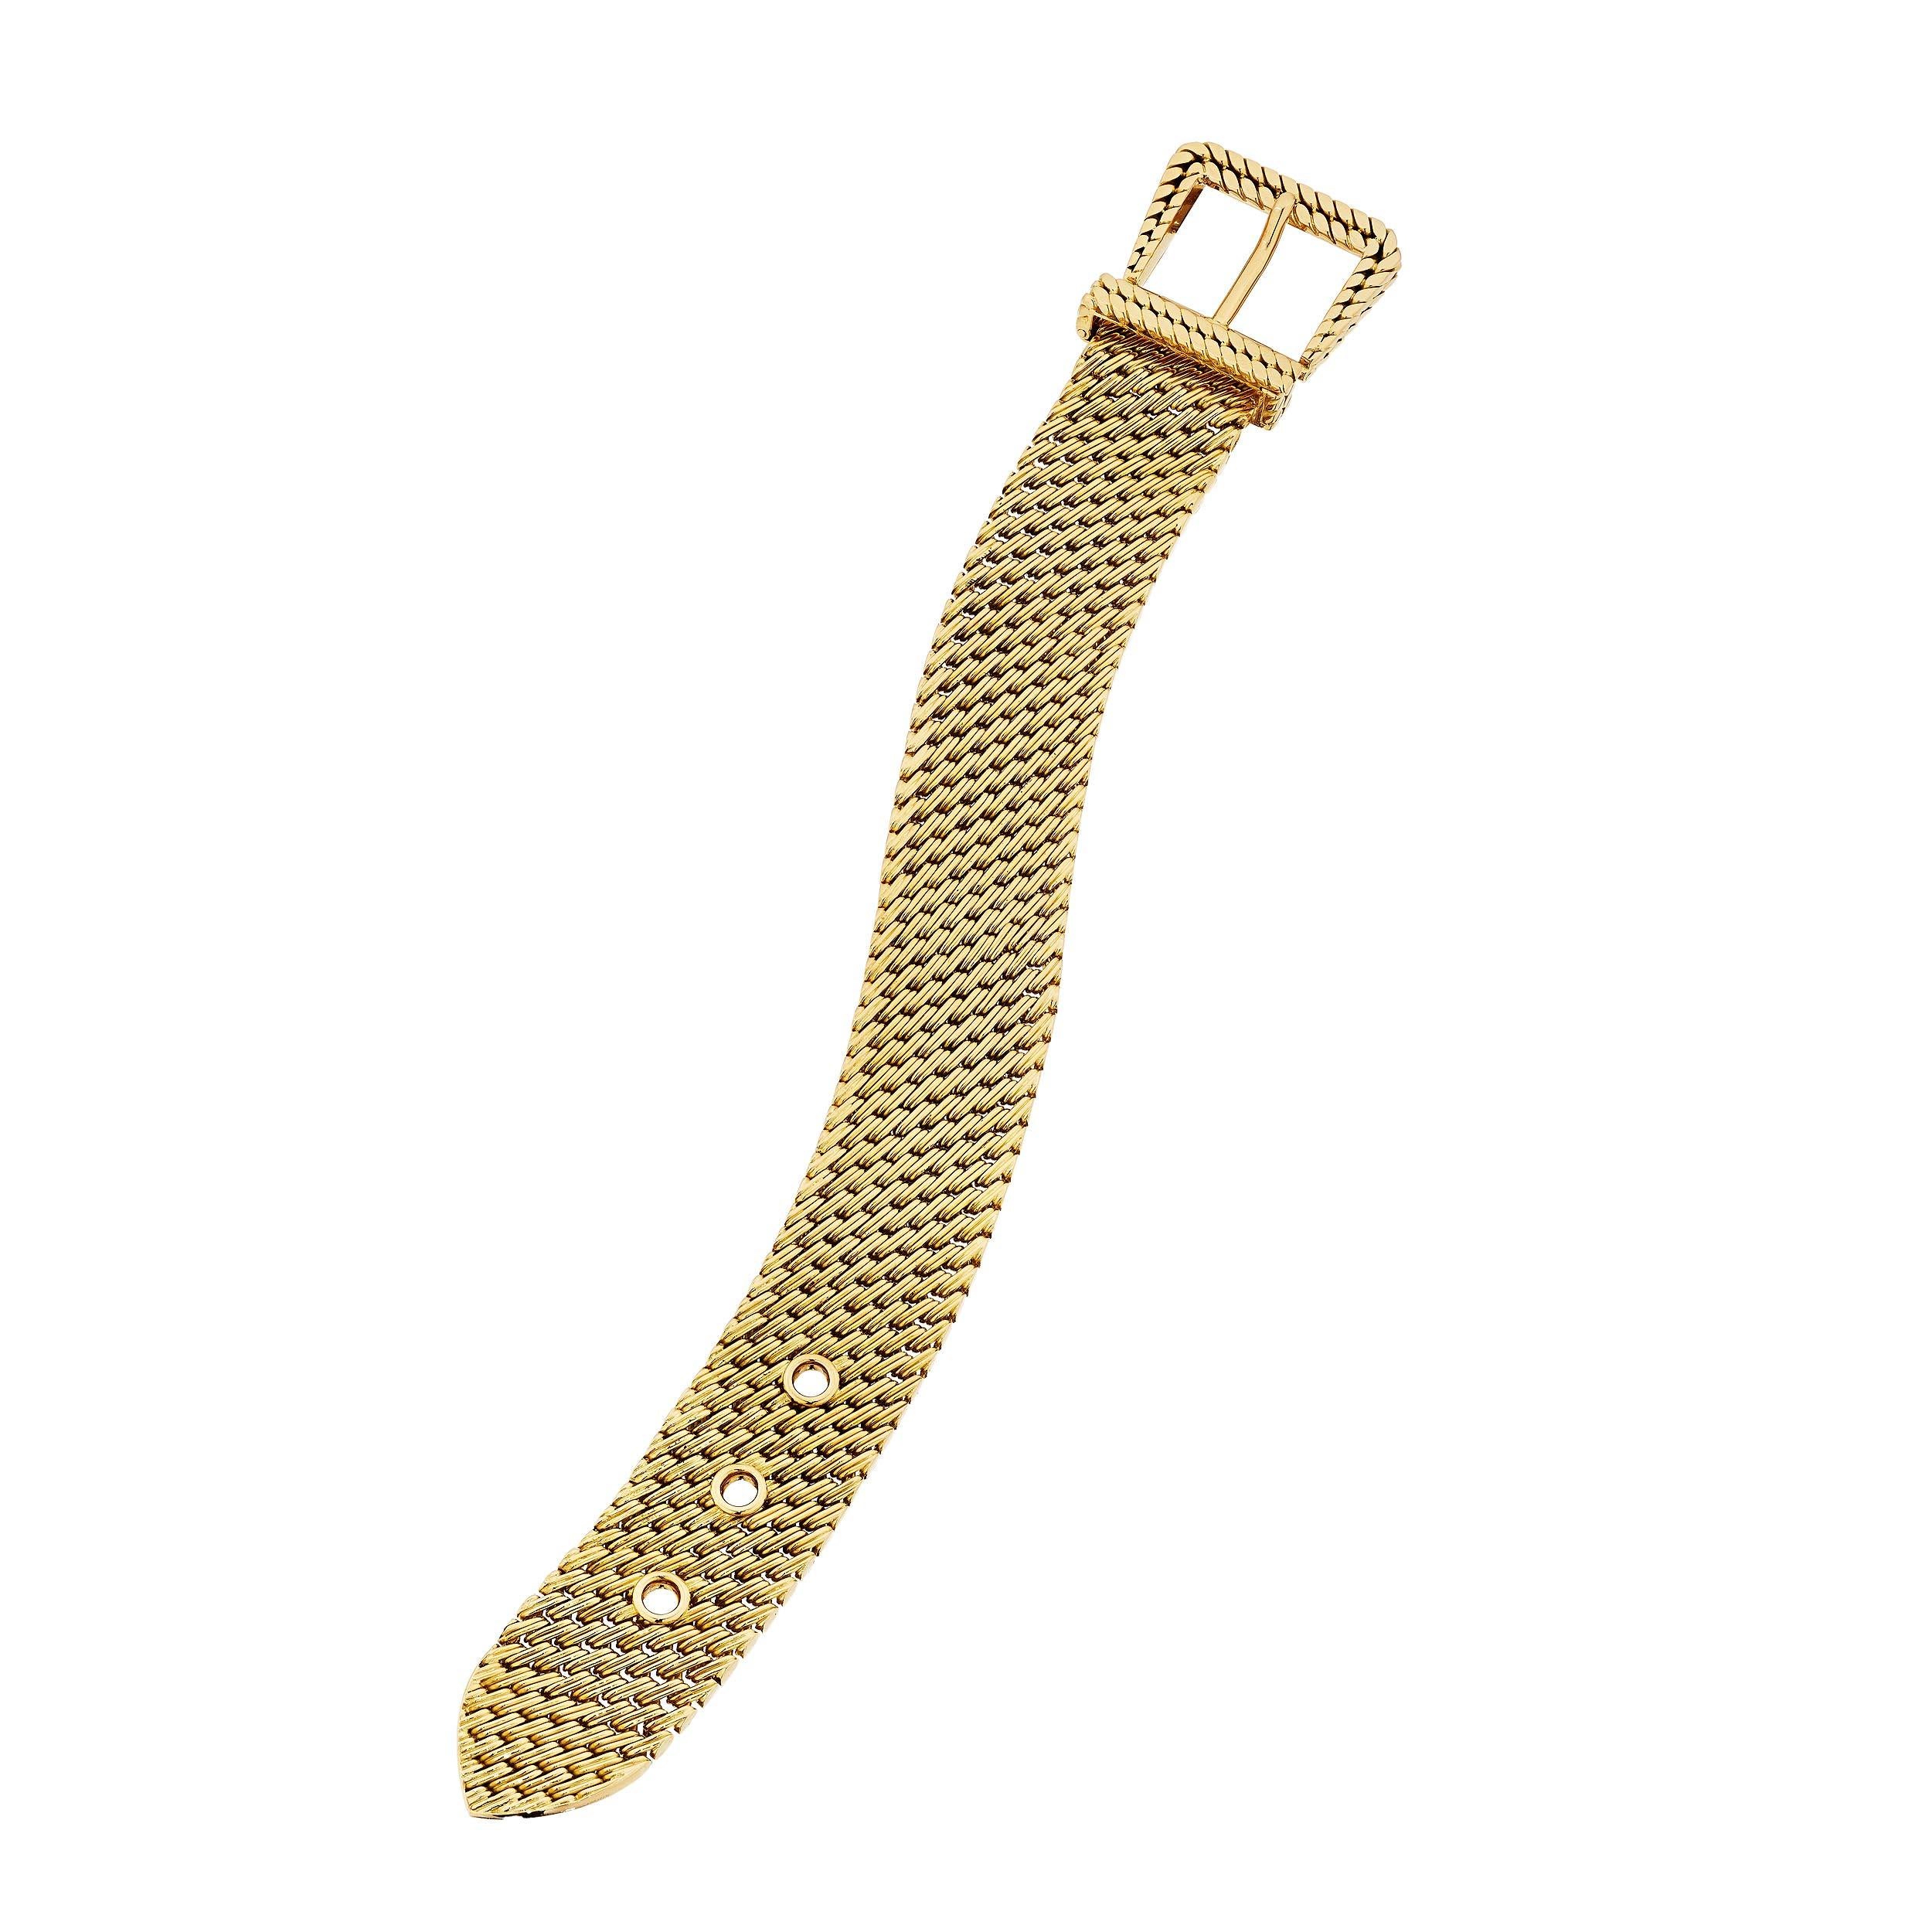 Buckle up and go with this Hermes Paris Georges L'enfant vintage gold buckle bracelet.  With a handsome all over woven pattern, this rare jewel is both stylish and collectible.  Signed Hermes Paris with Georges L'enfant hallmark.  Circa 1980-85.  9